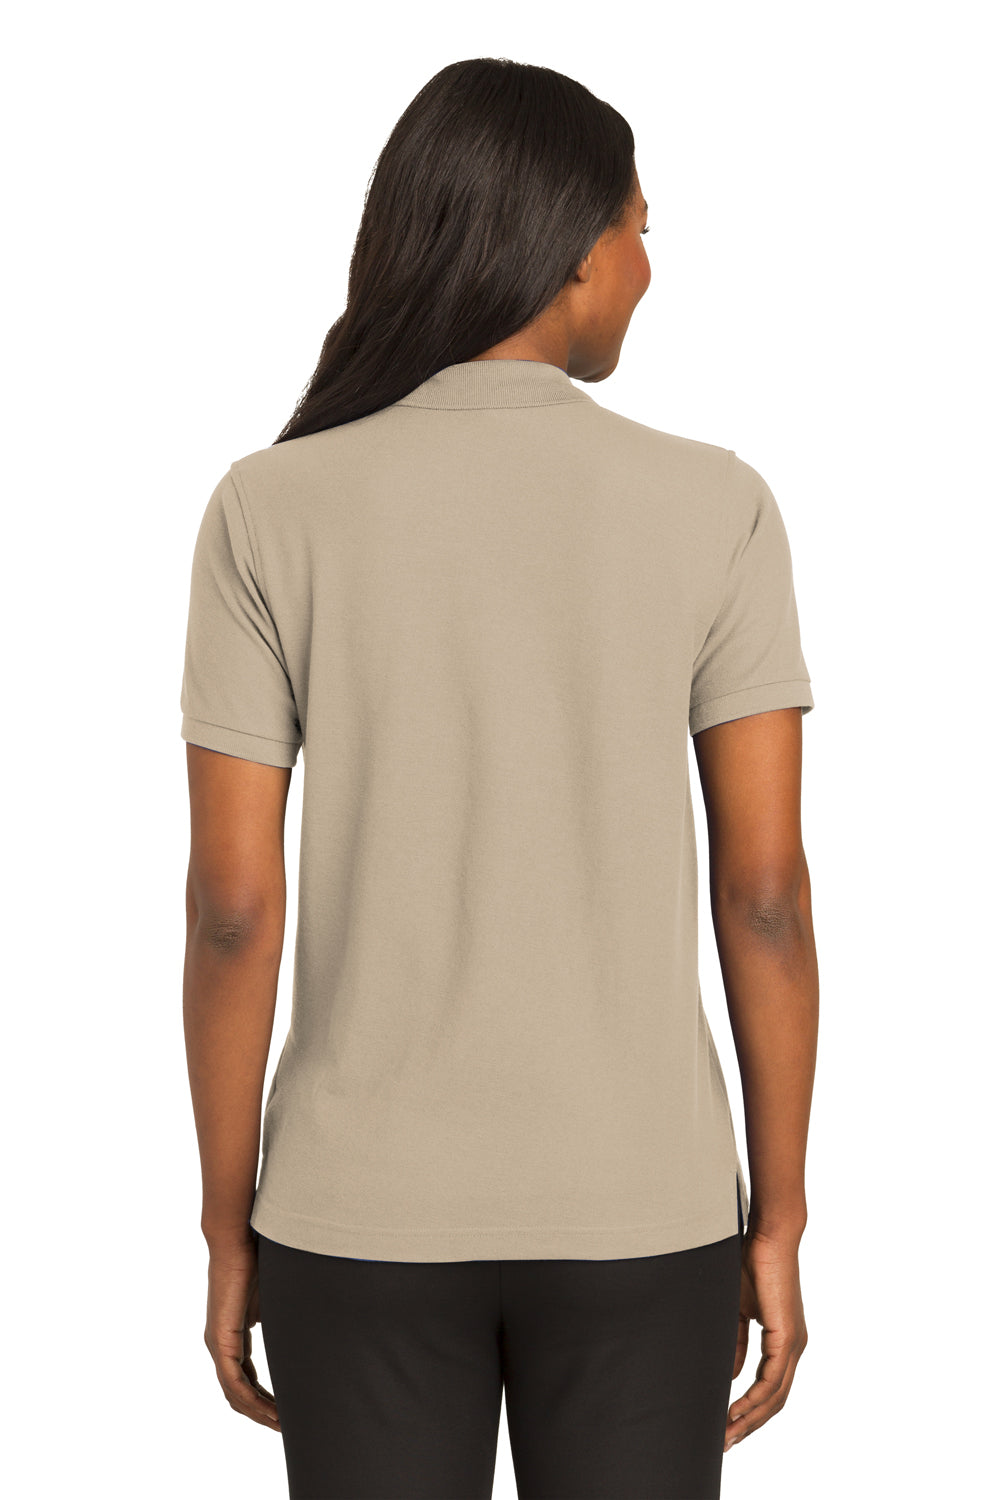 Port Authority L500 Womens Silk Touch Wrinkle Resistant Short Sleeve Polo Shirt Stone Brown Back